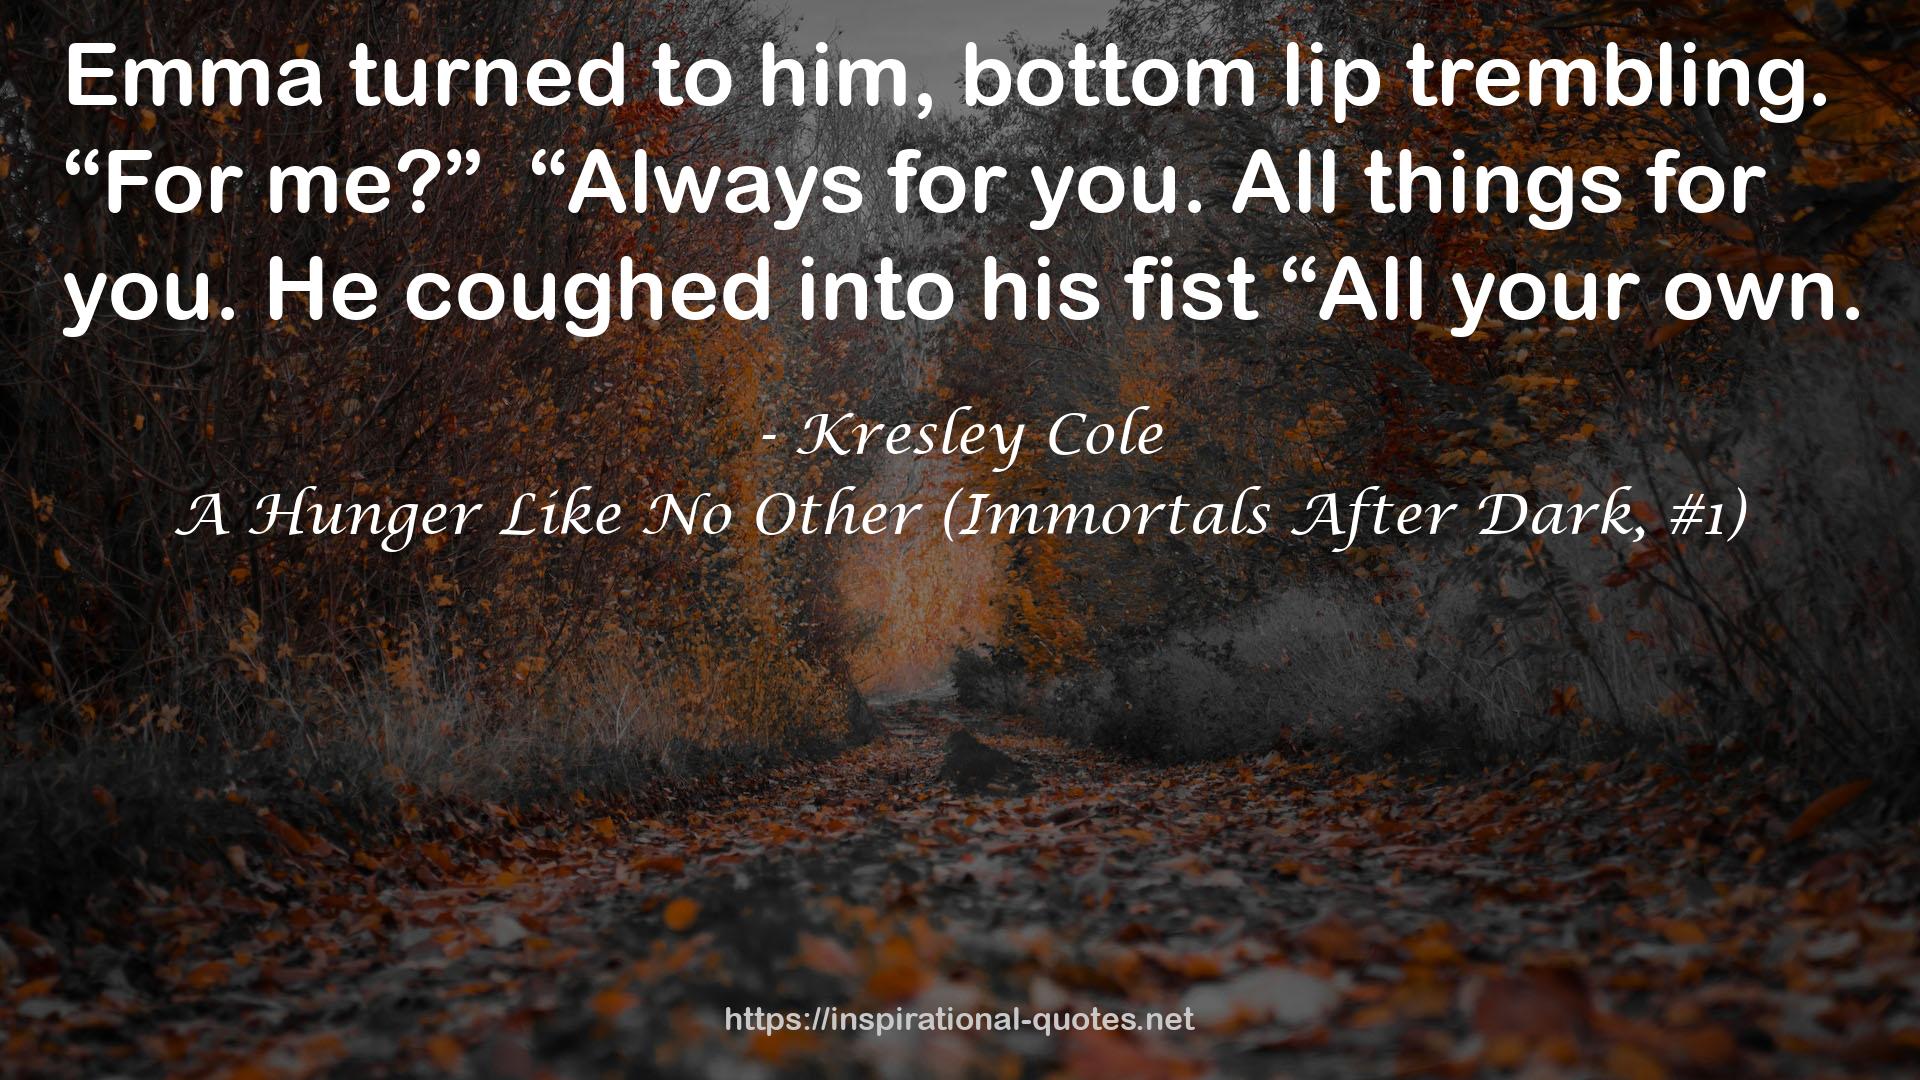 A Hunger Like No Other (Immortals After Dark, #1) QUOTES